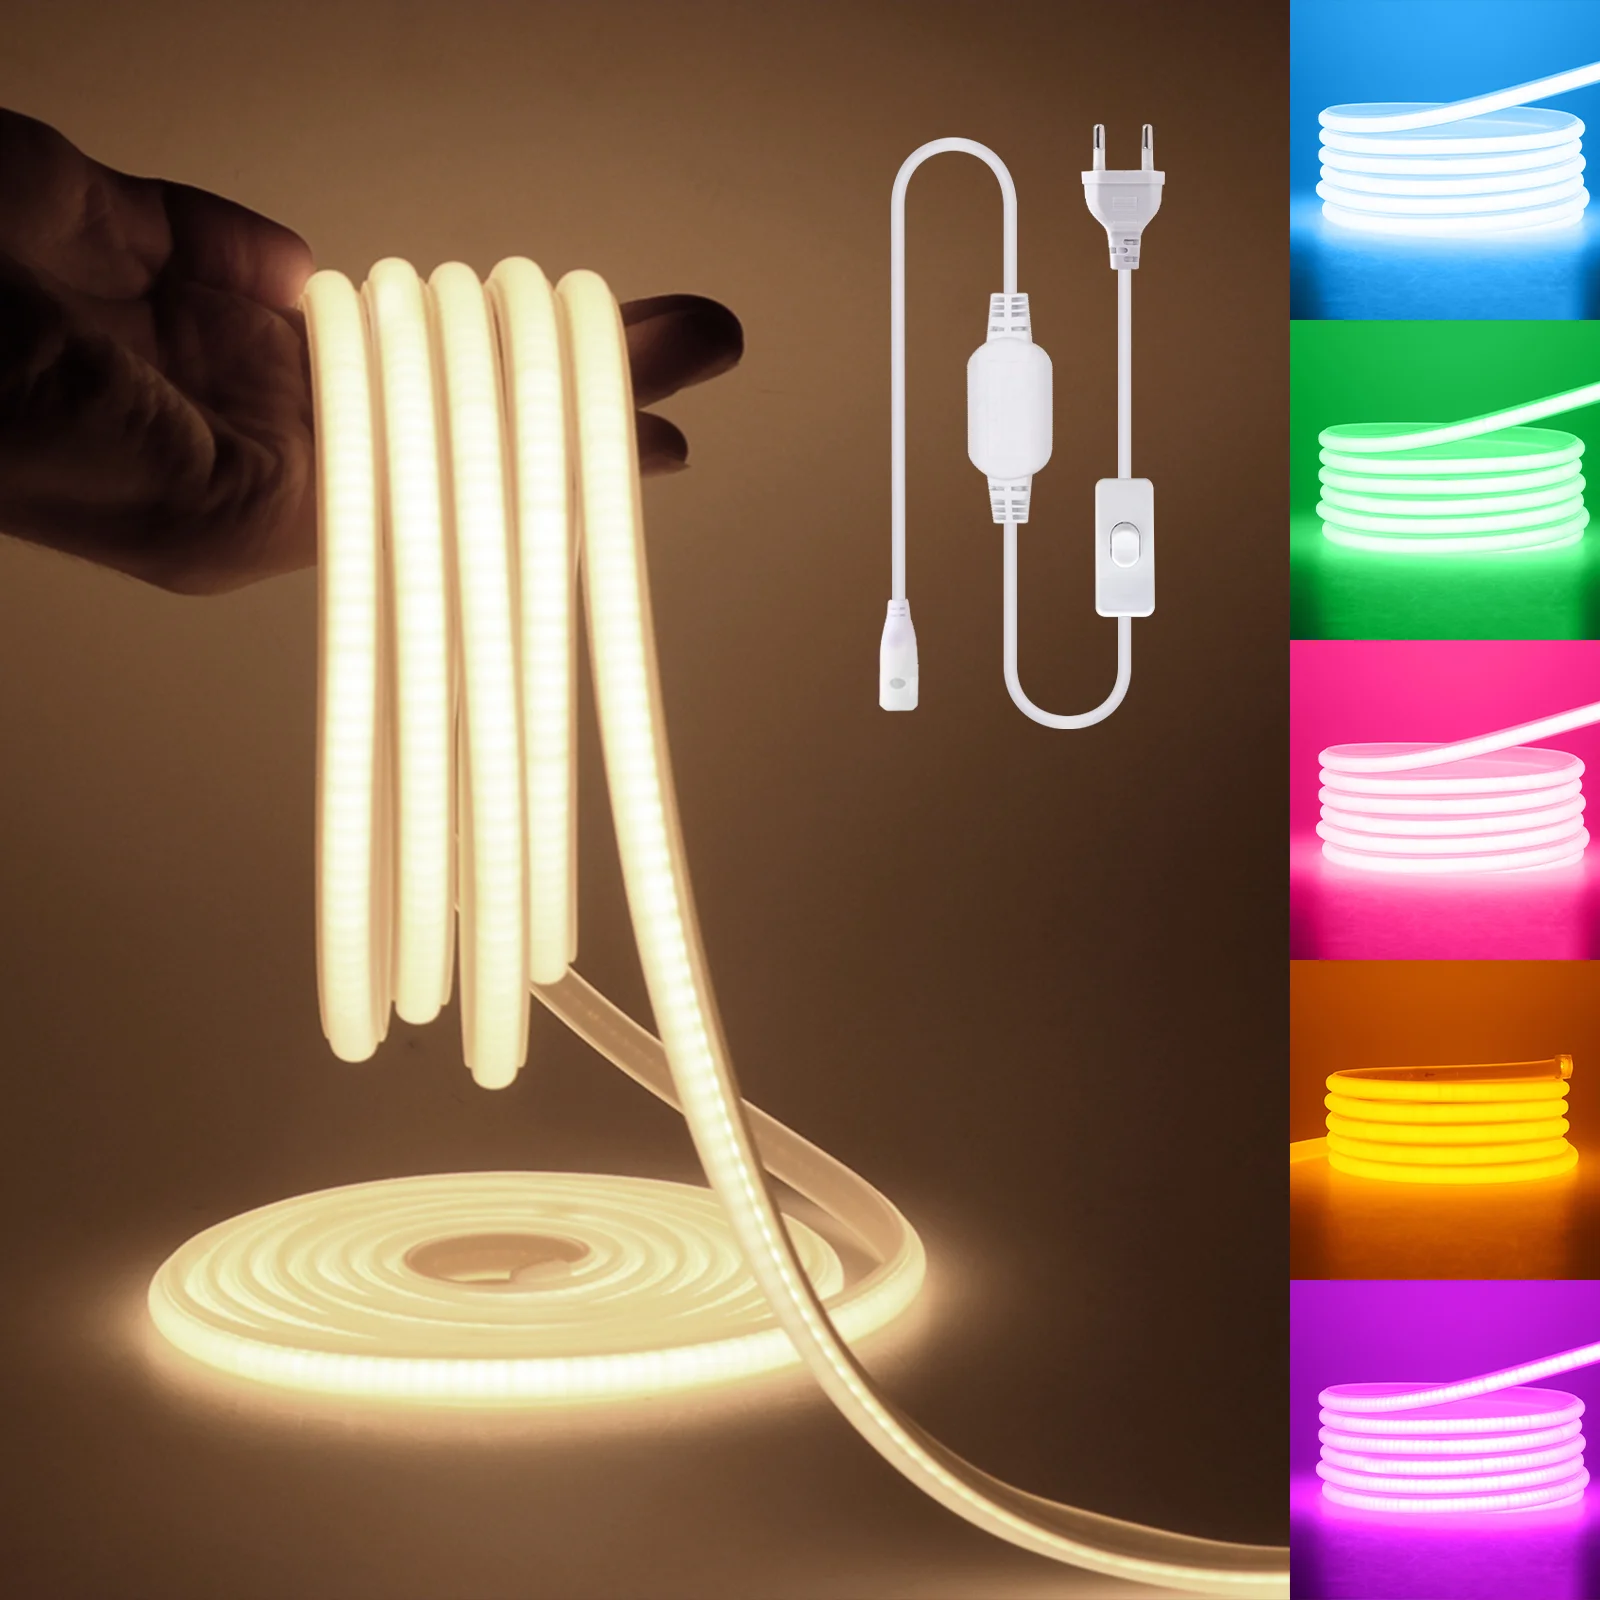 COB LED Strip Light with Switch EU Plug 220V Super Bright 288Leds/m Waterproof Flexible Silicone Neon Strip Soft Ribbon LED Tape super bright smd 5630 5730 led strip 220v 110v with eu us plug 180leds m ip67 waterproof warm white in outdoor flexible light